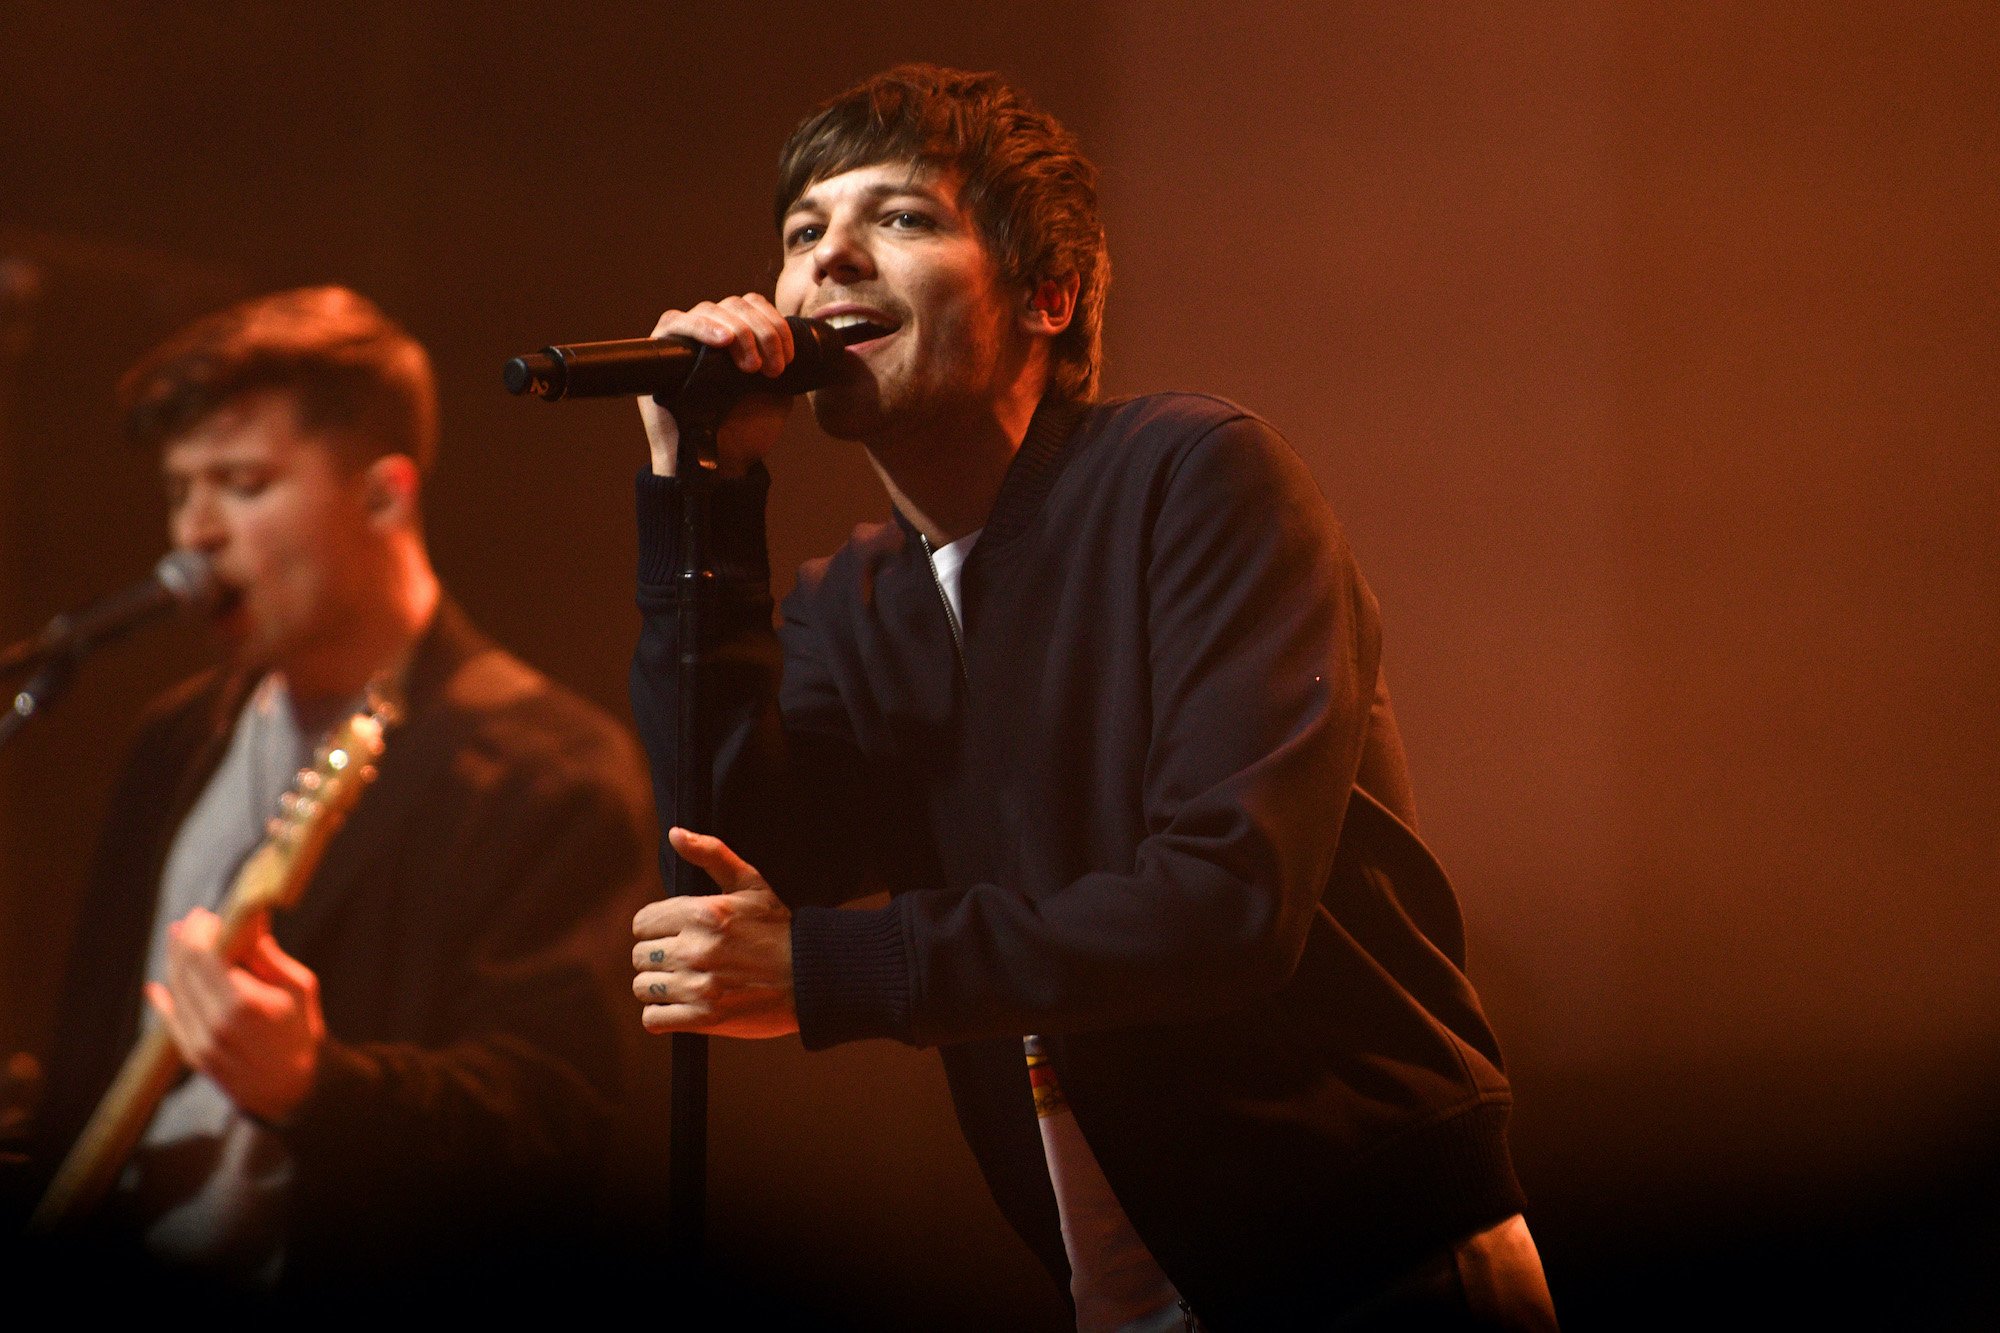 Who Is Louis Tomlinson’s Song ‘Miss You’ About?